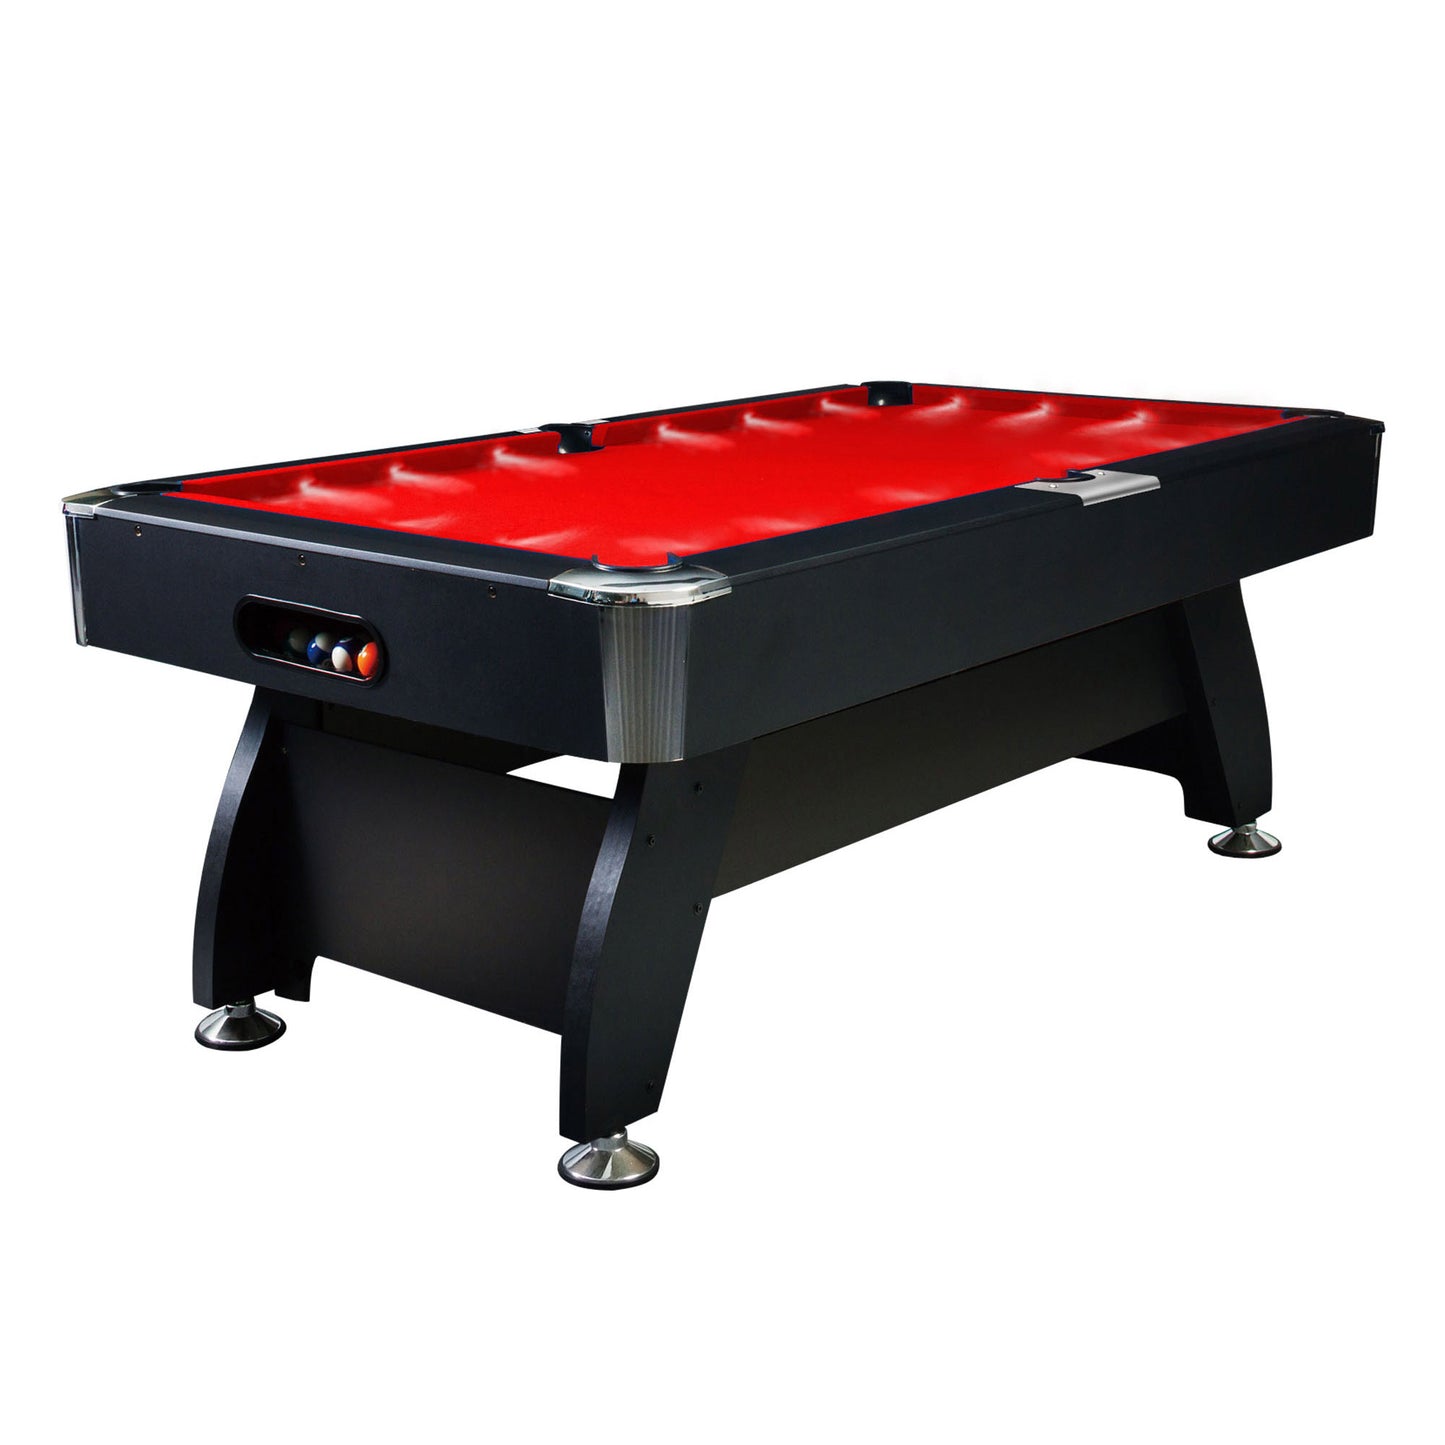 8FT LED Snooker Billiard Pool Table with Free Accessories - Red